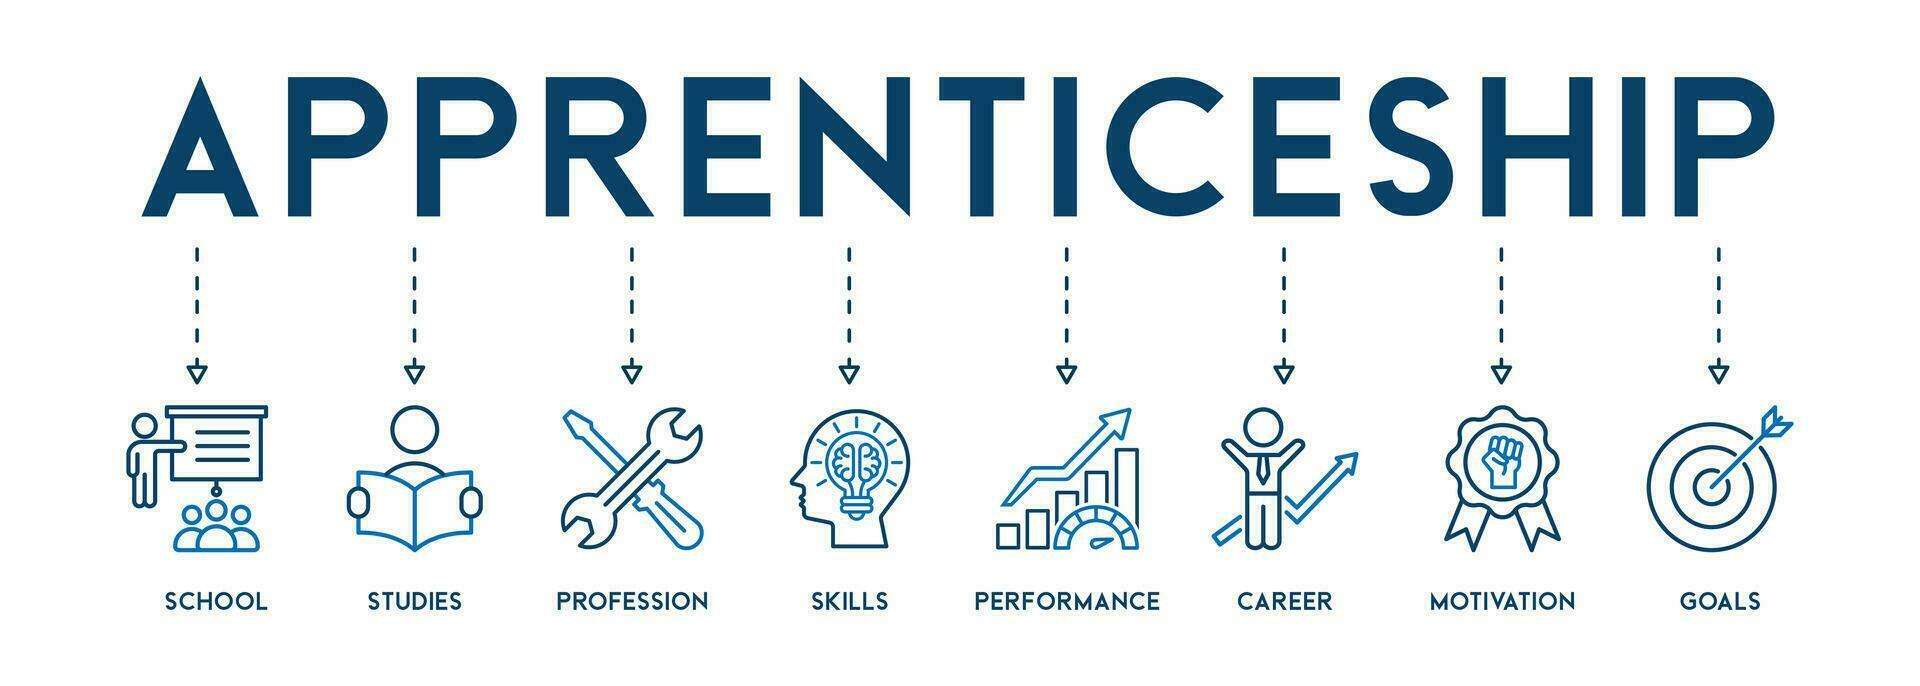 Apprenticeship concept icons banner web icon vector illustration of school, studies, profession, skills, performance, career, motivation and goals